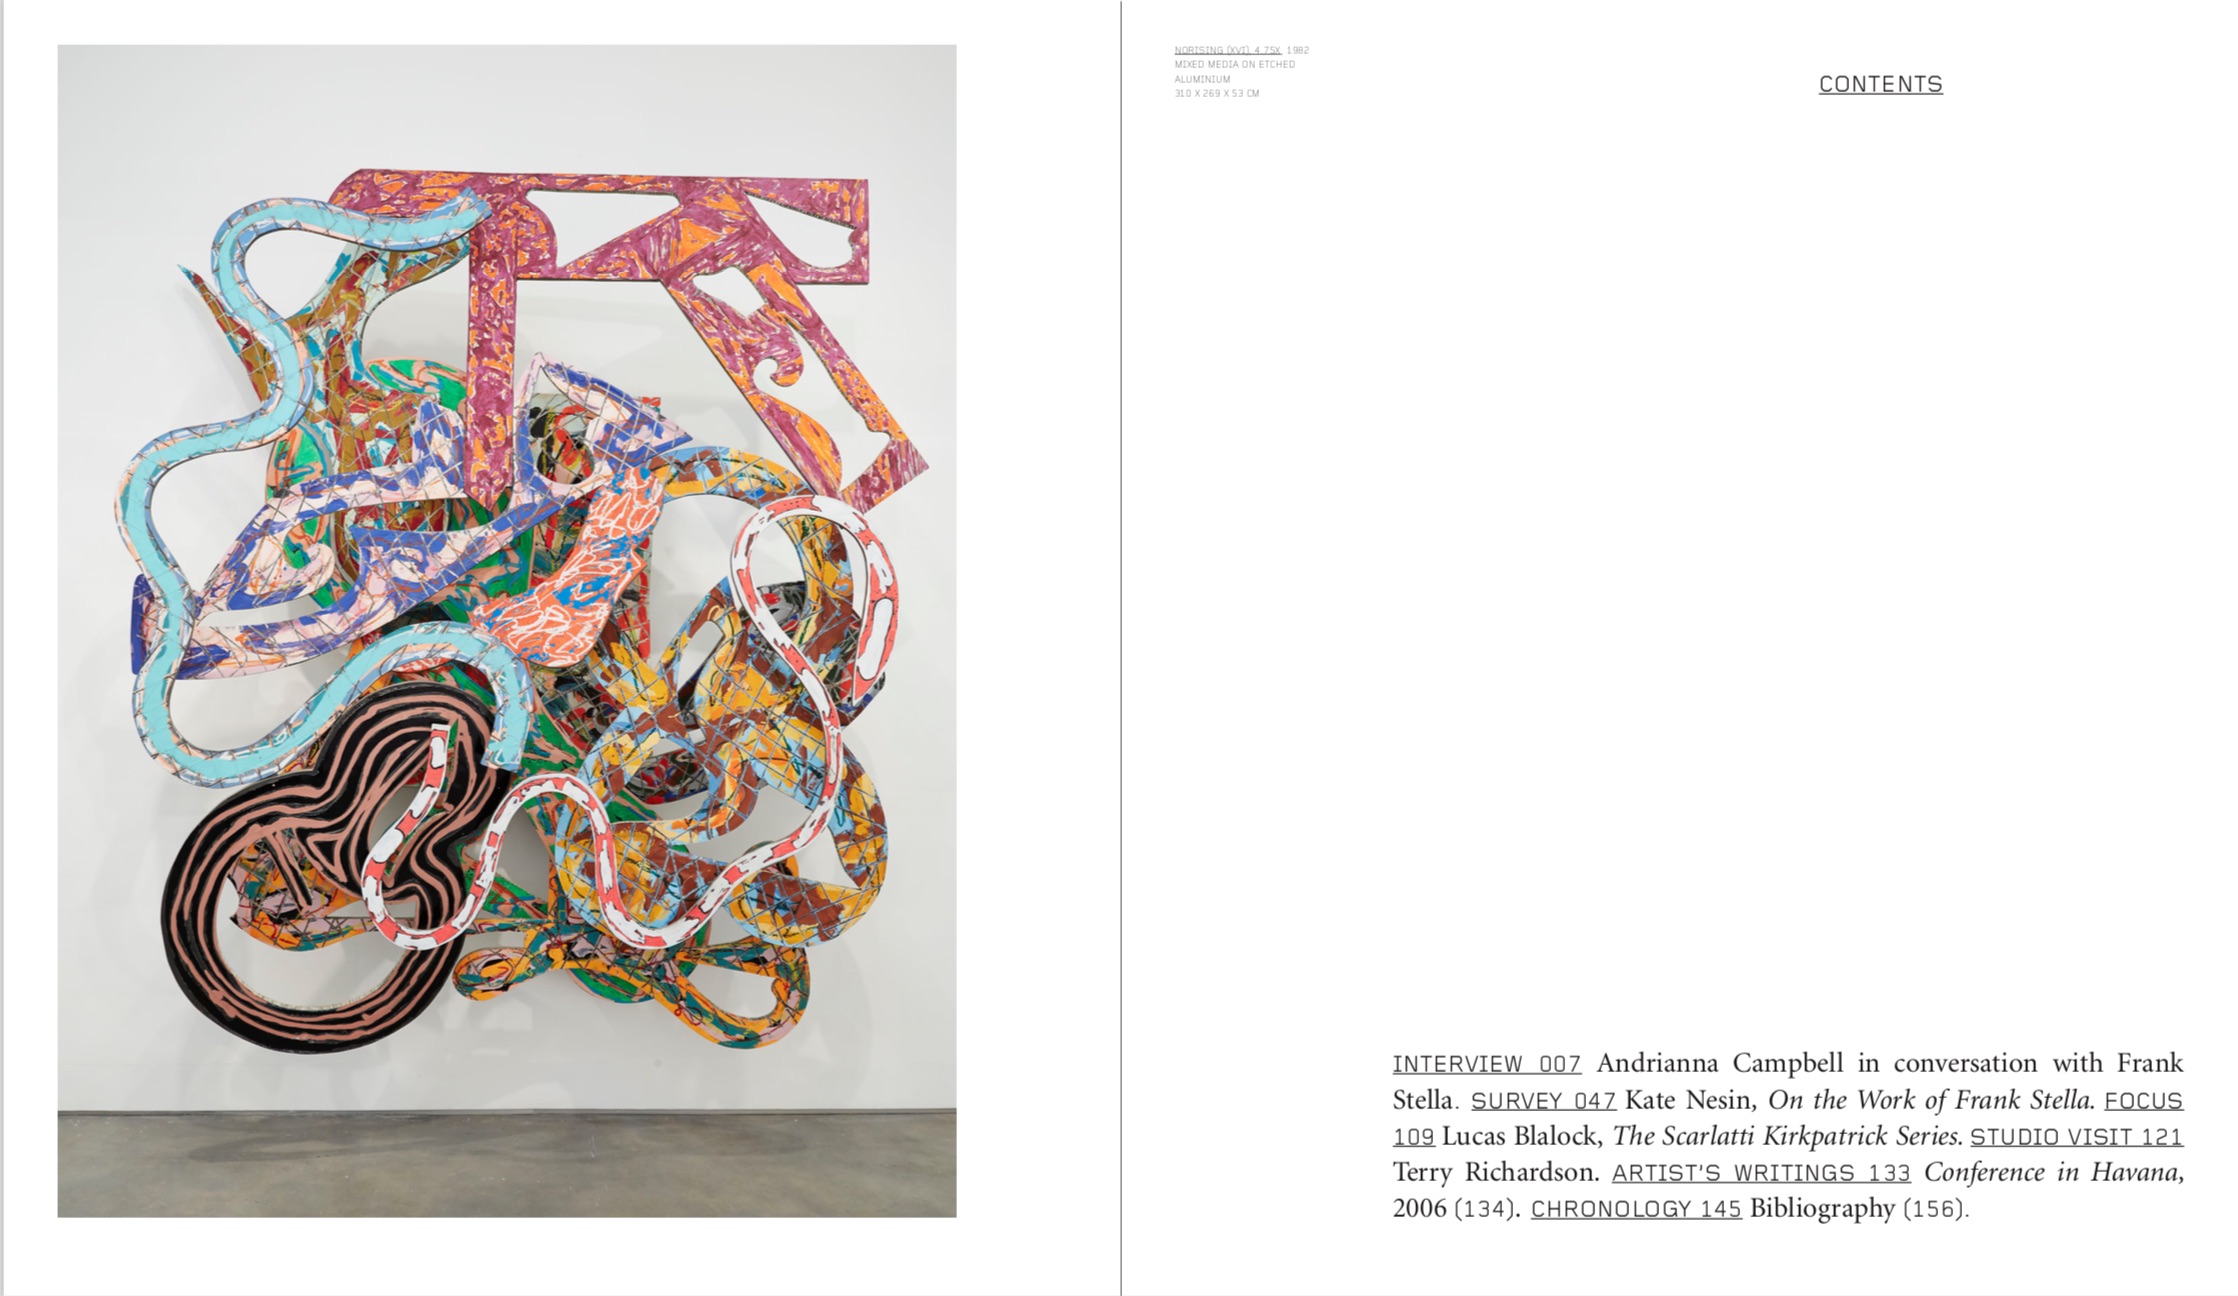 By Andrianna Campbell, Kate Nesin, Lucas Blalock and Terry Richardson from Frank Stella copyright Phaidon 2018